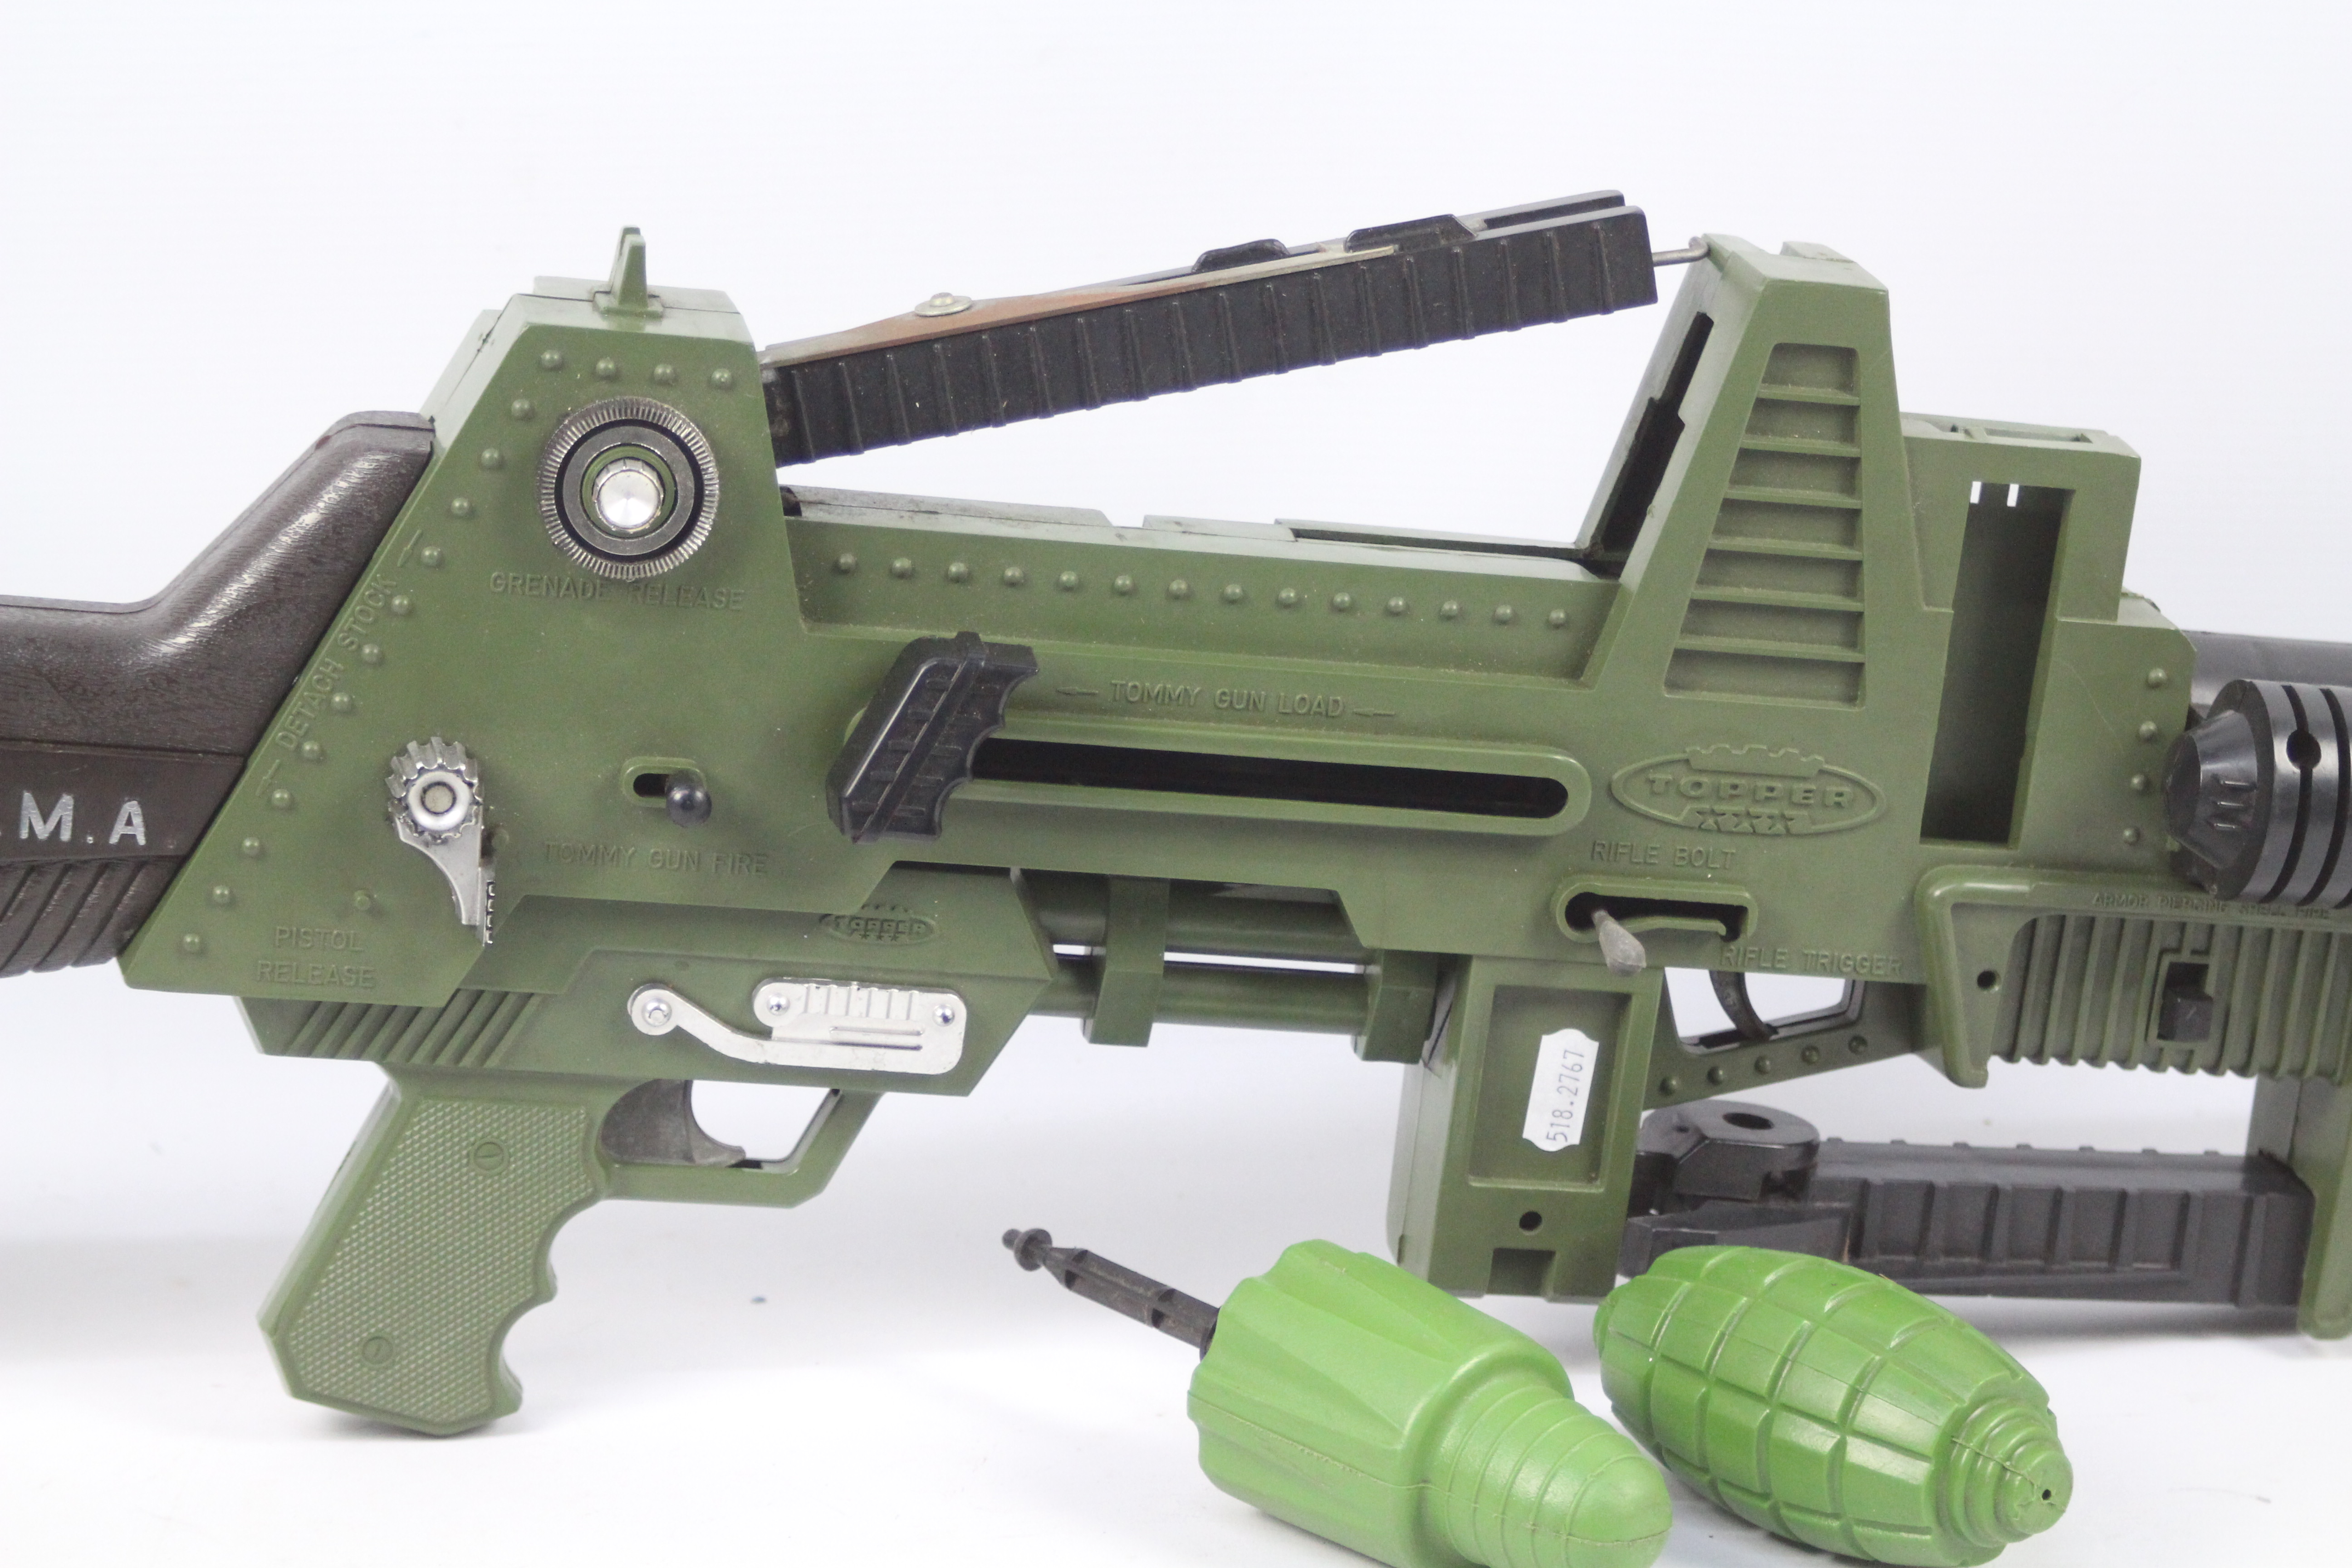 Triang - Topper Toys UK - An unboxed "Johnny Seven One Man Army" plastic 'Seven Guns in One' toy - Image 3 of 5